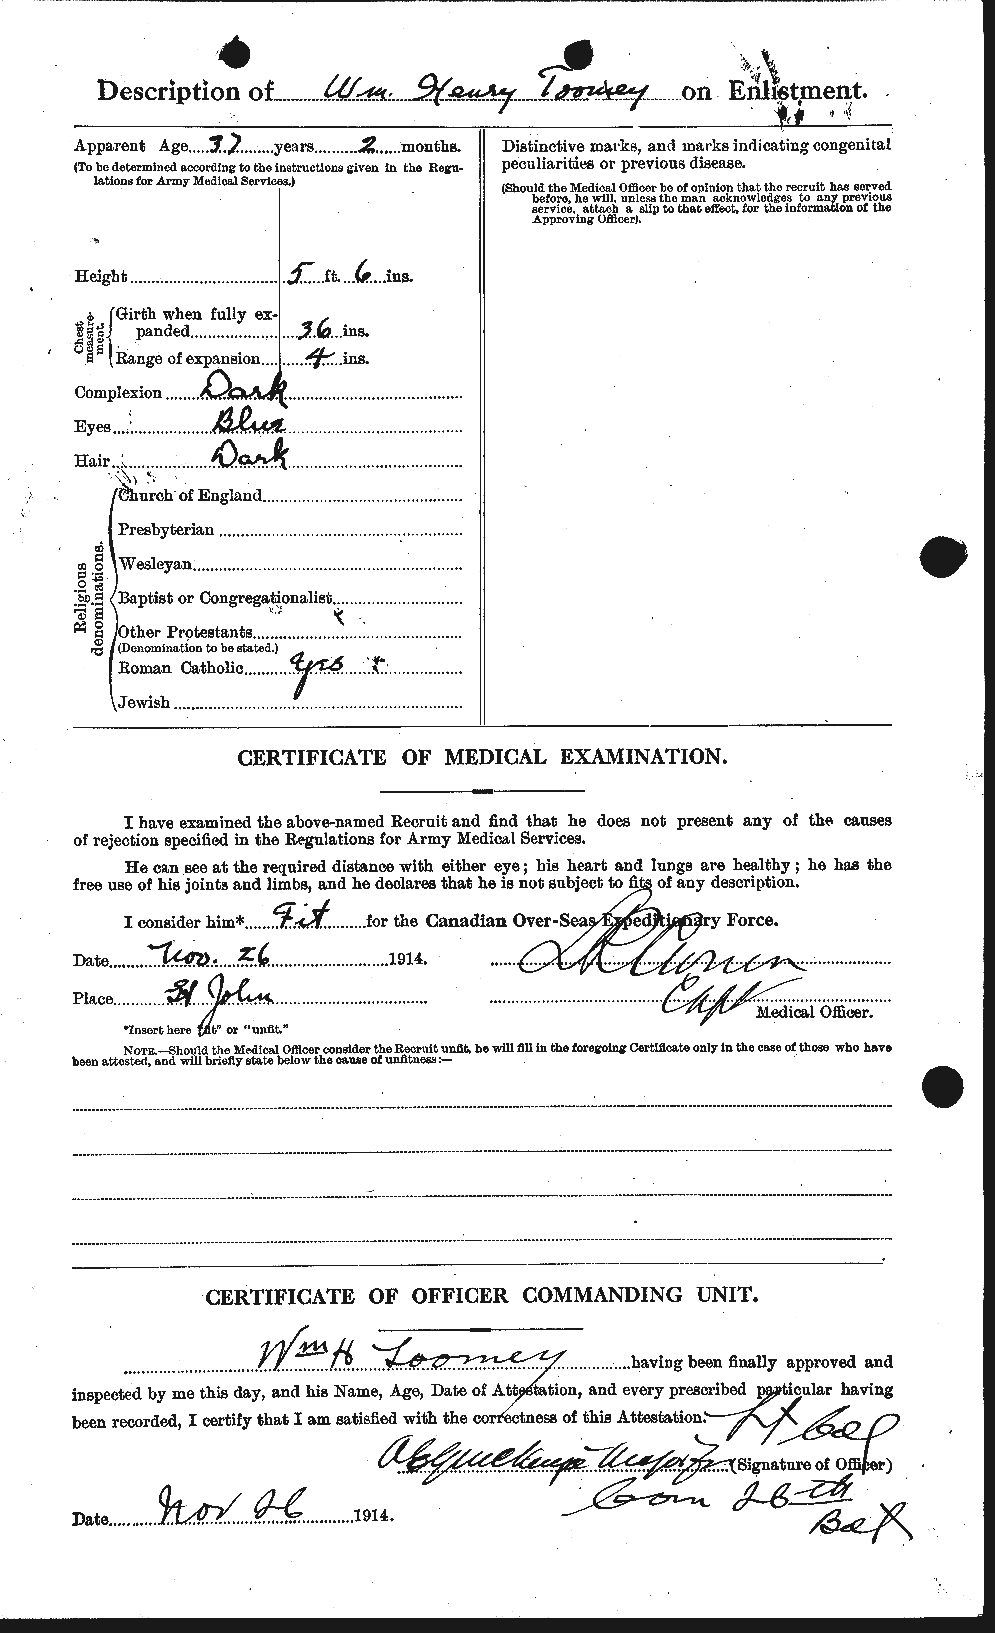 Personnel Records of the First World War - CEF 645695b